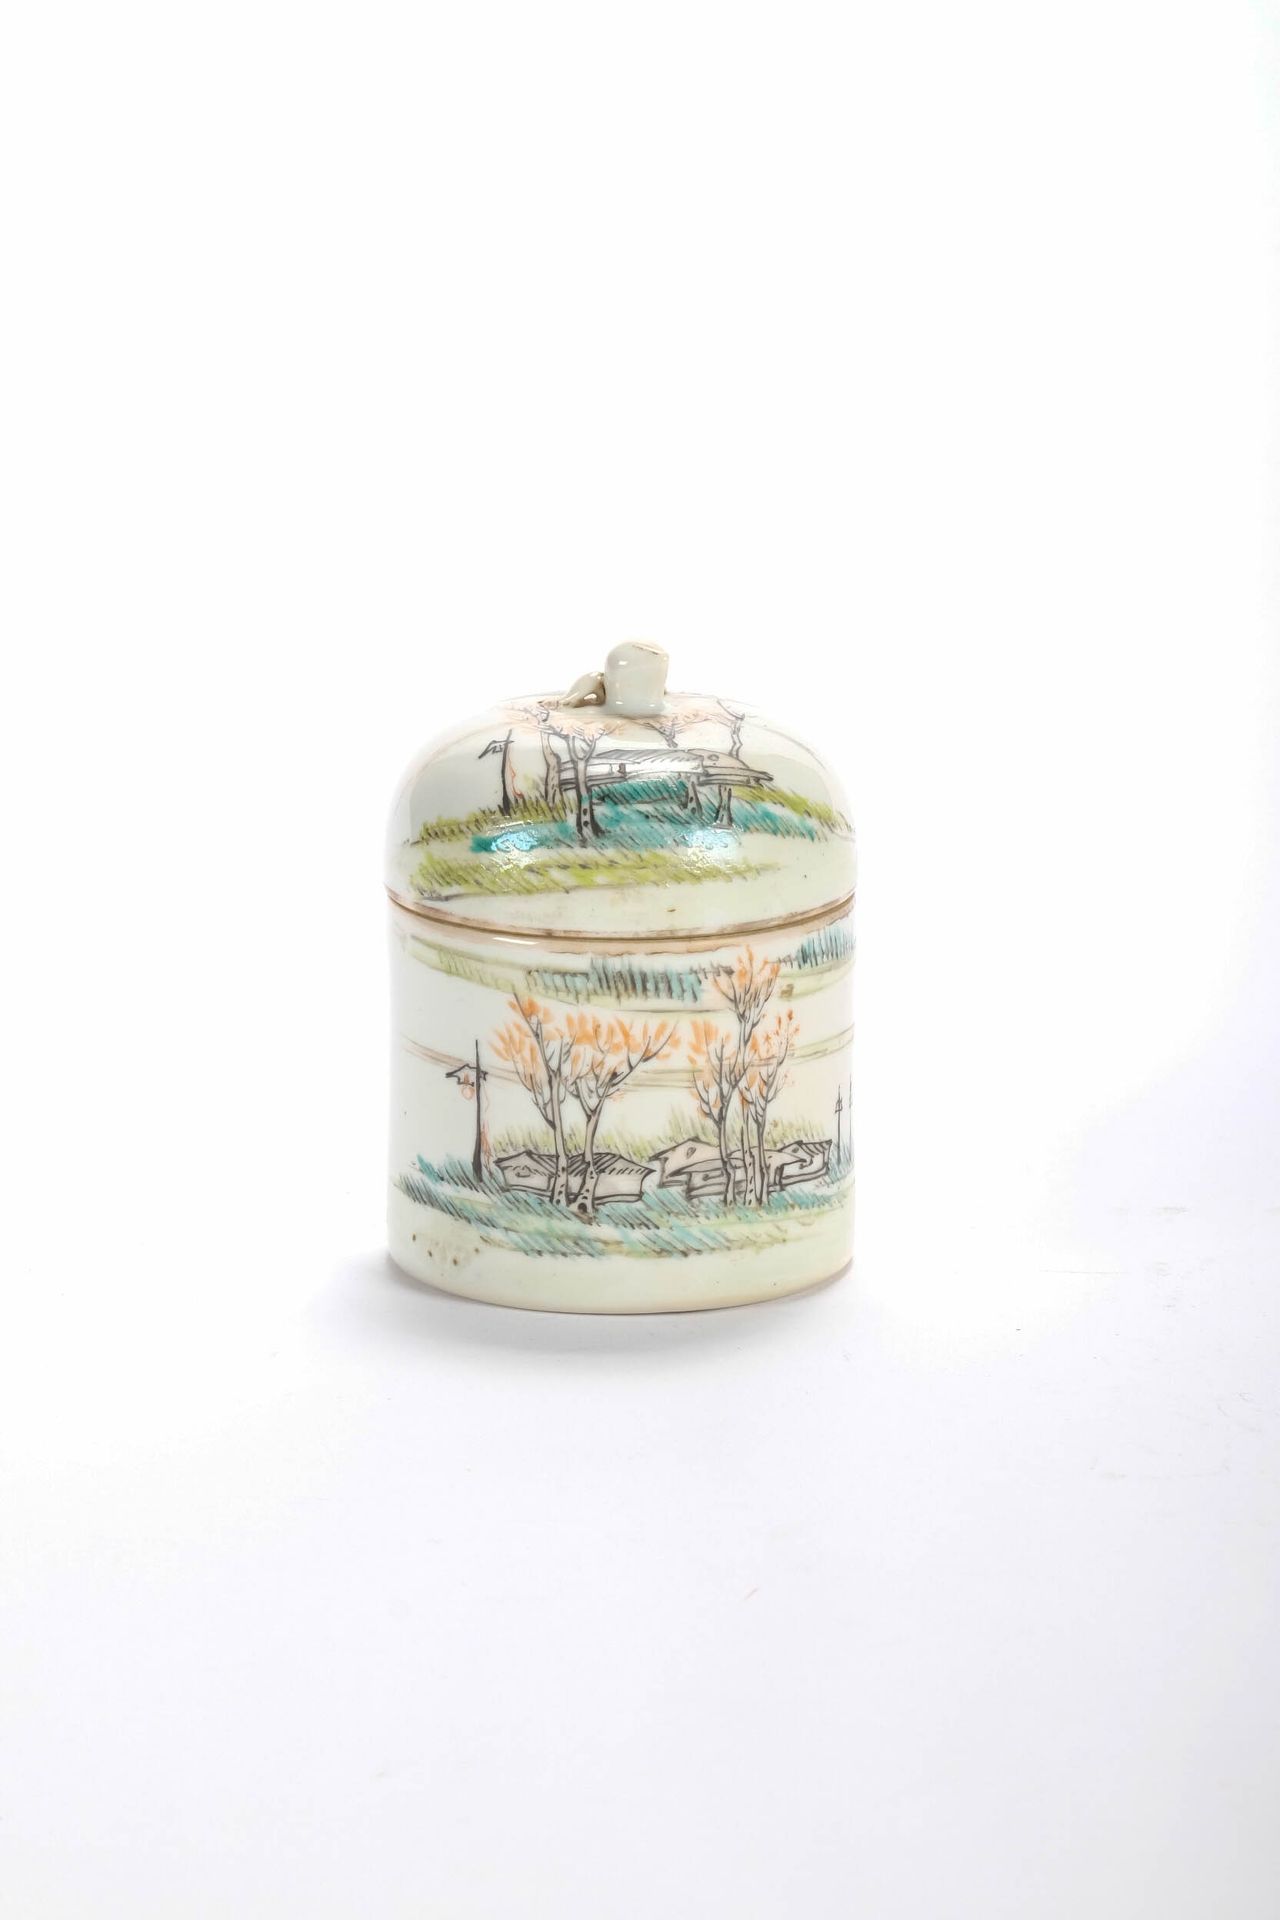 CHINE (CHINA, 中国) Covered pot in porcelain. End XIX. H 10 cm.